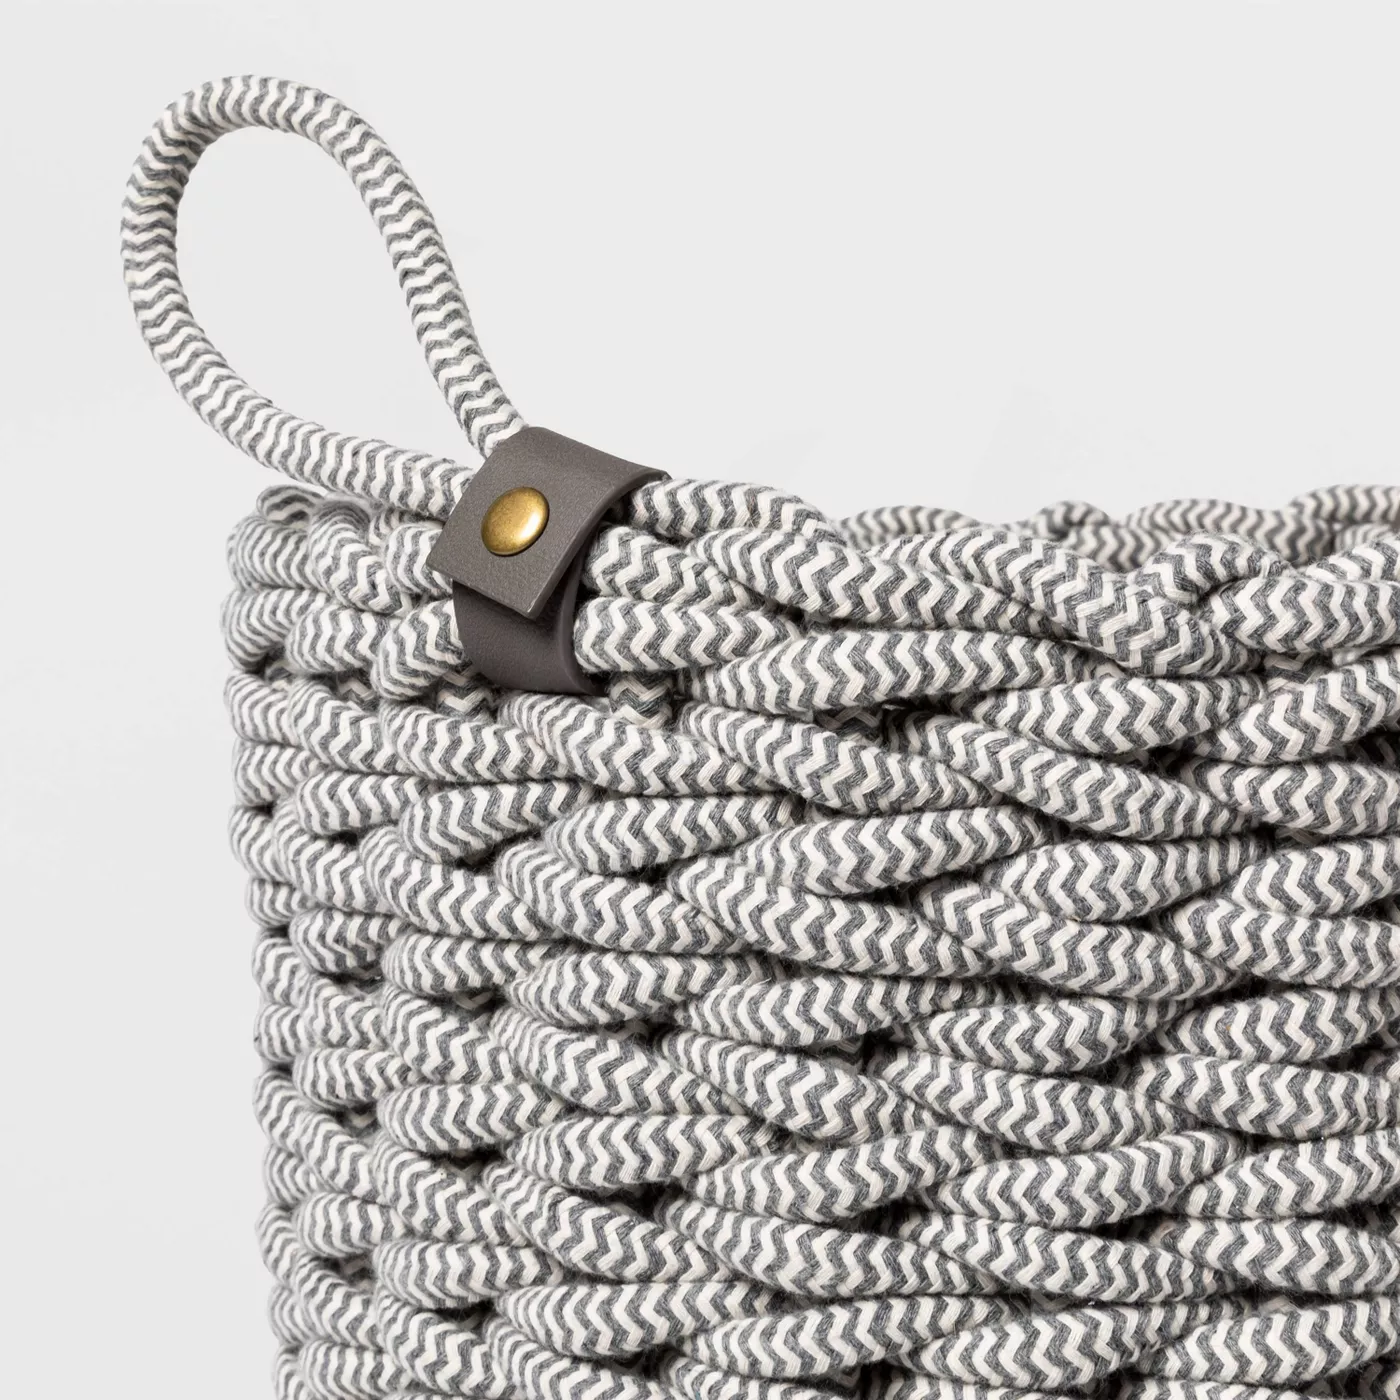 Coiled Rope Fishtail Weave Basket with Faux Leather Accent Gray - Project 62™ - image 3 of 6